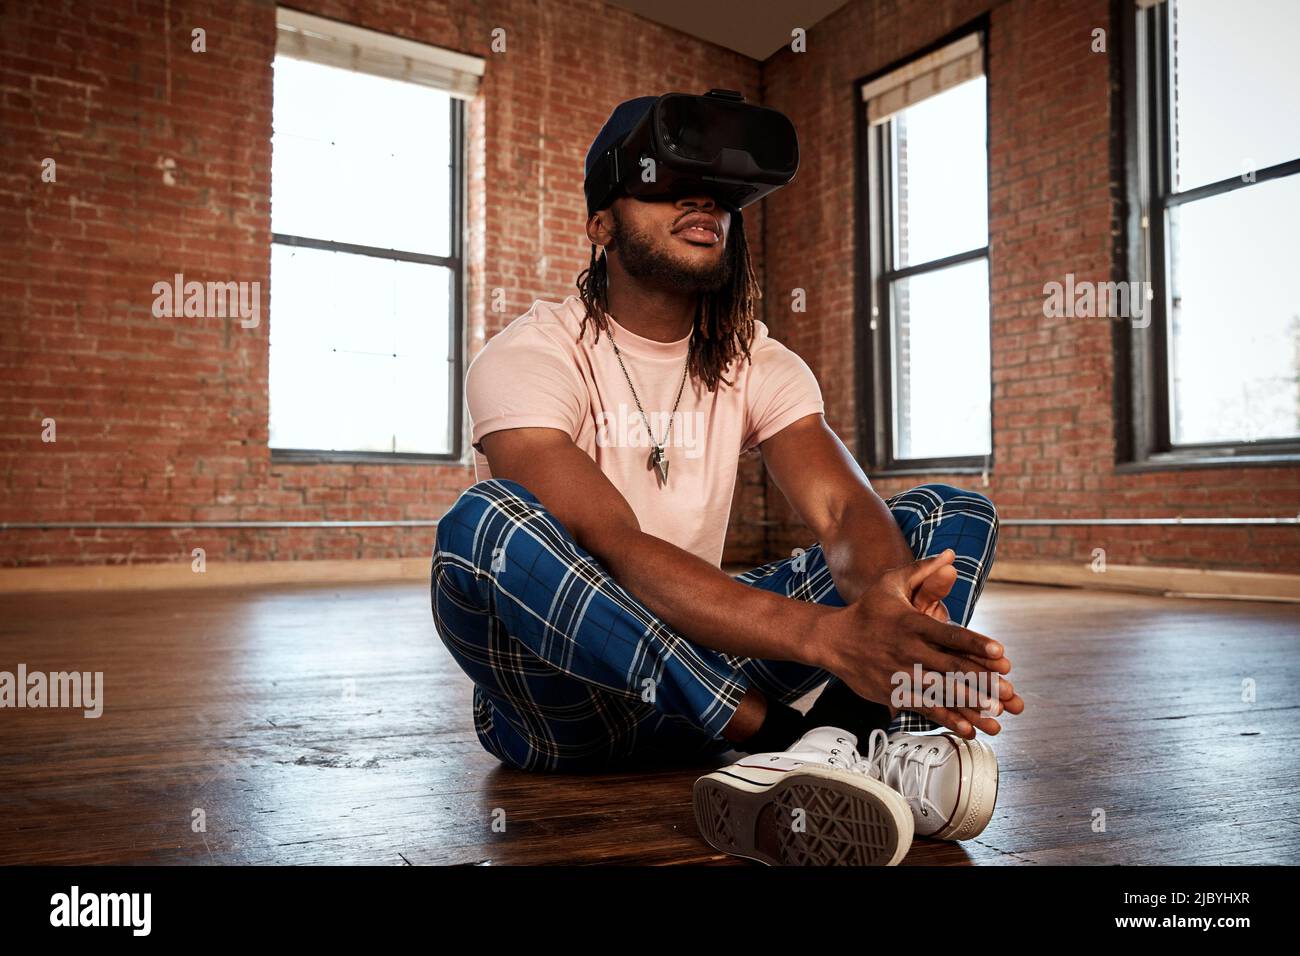 portrait of stylish young ethnic man wearing VR headset in empty loft space Stock Photo